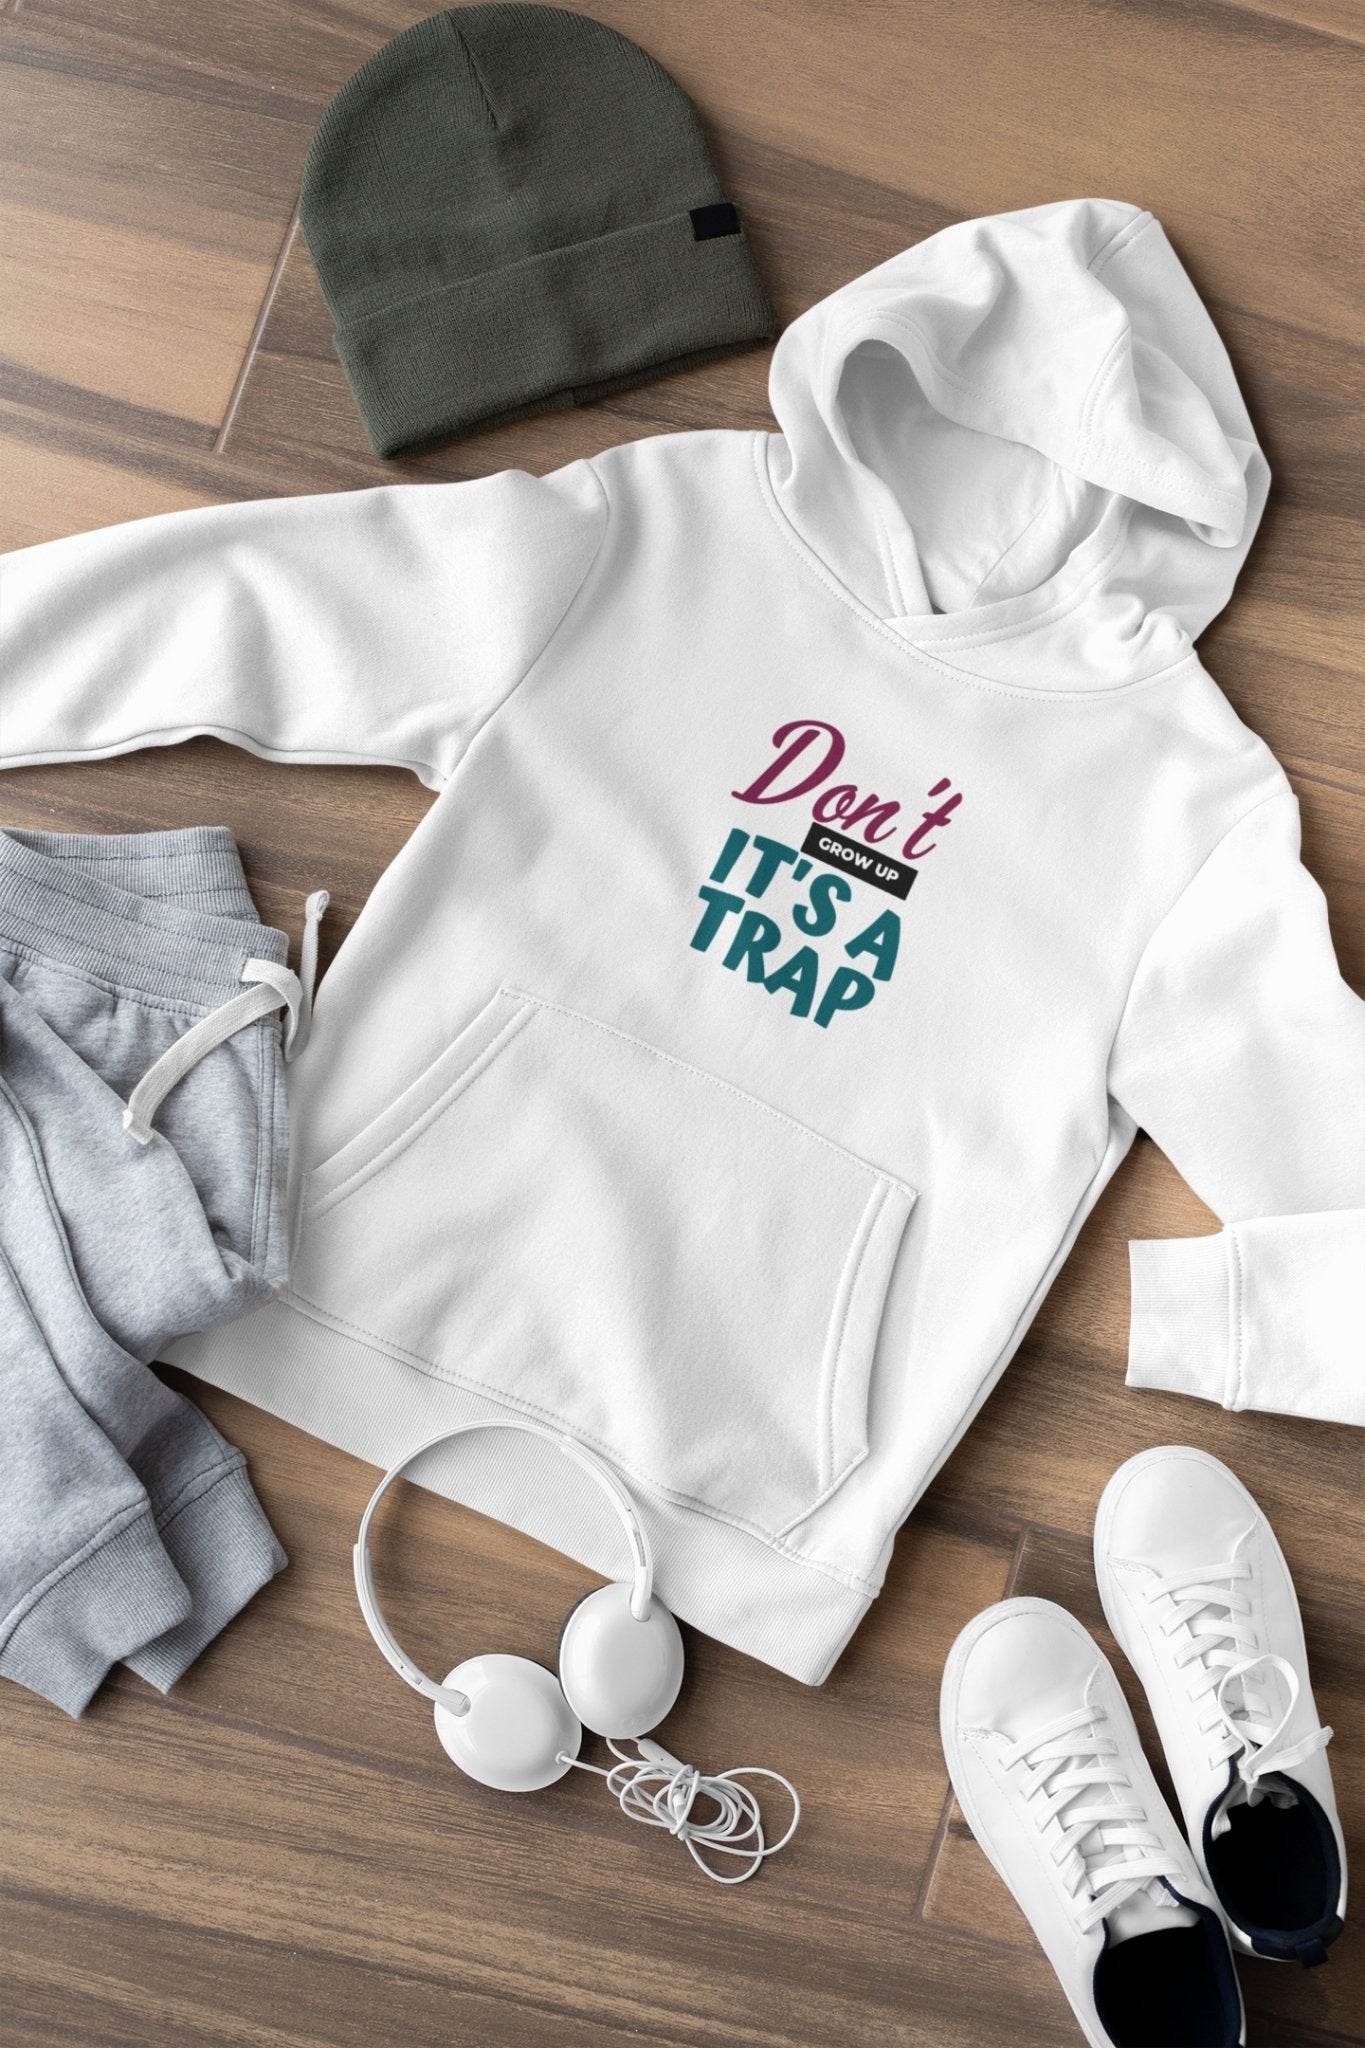 Dont Grow Up Its a Trap Typography Men Hoodies-FunkyTradition - Funky Tees Club